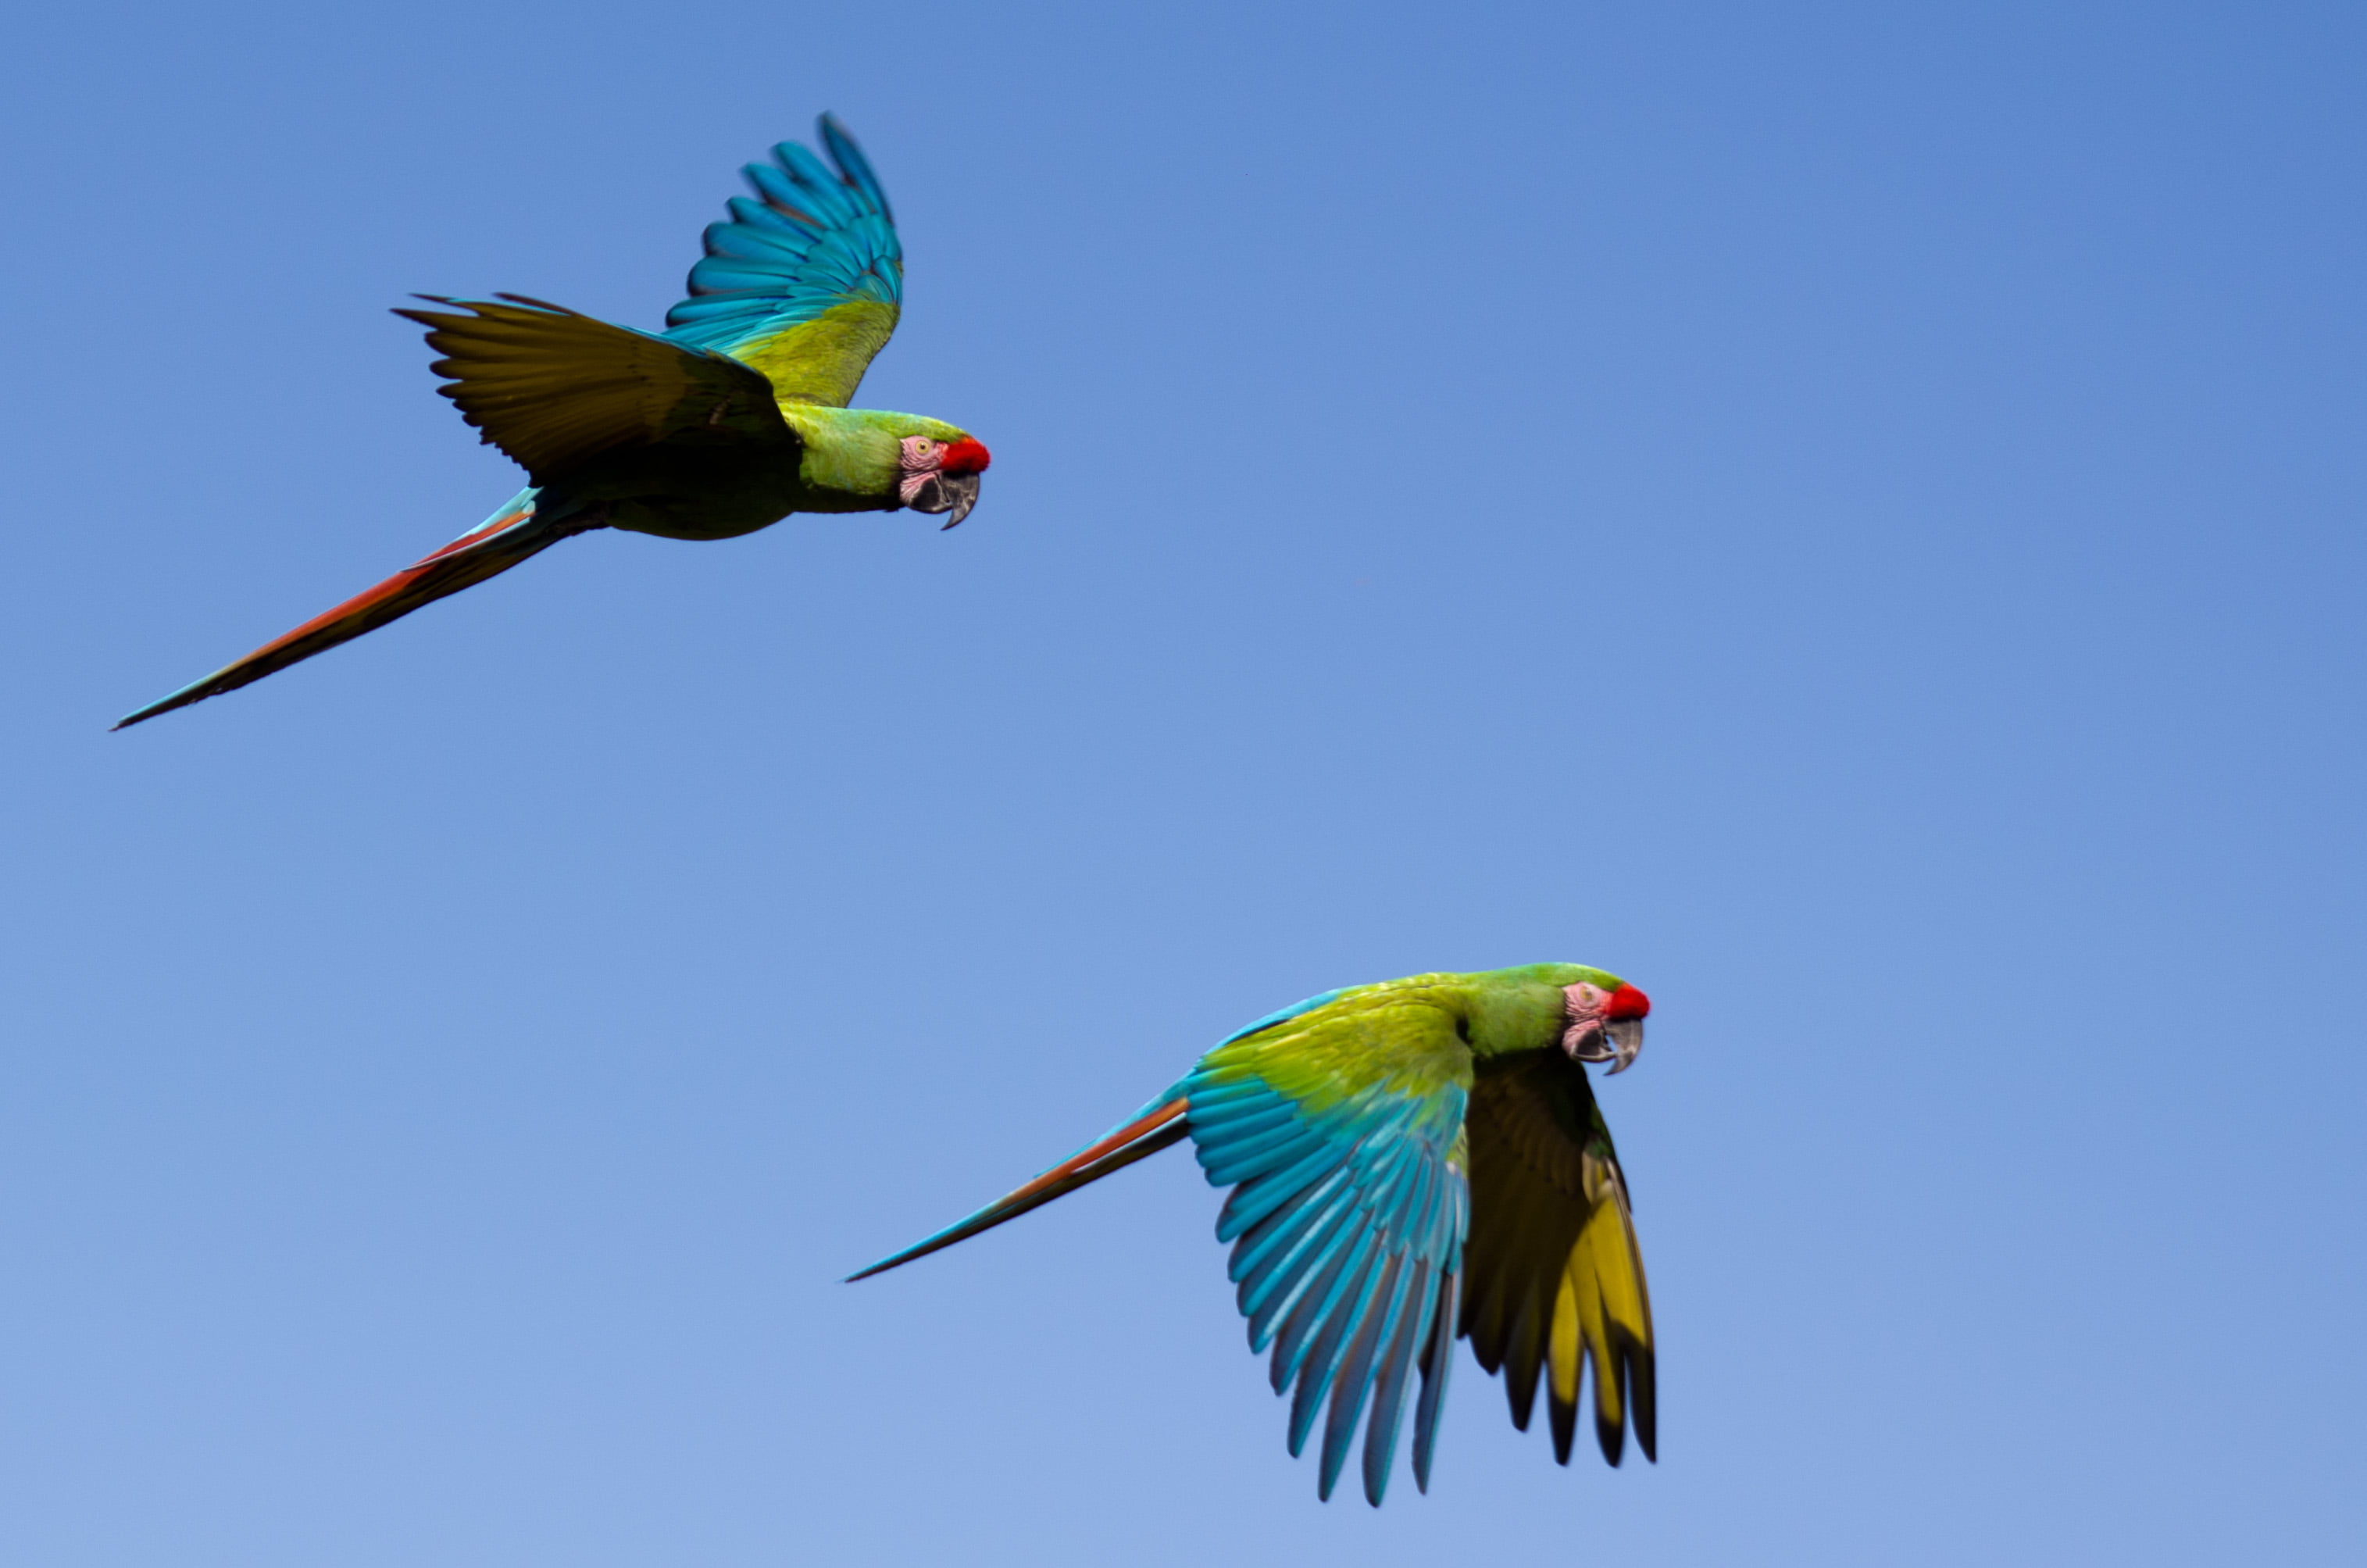 two Macaw birds flying during daytime